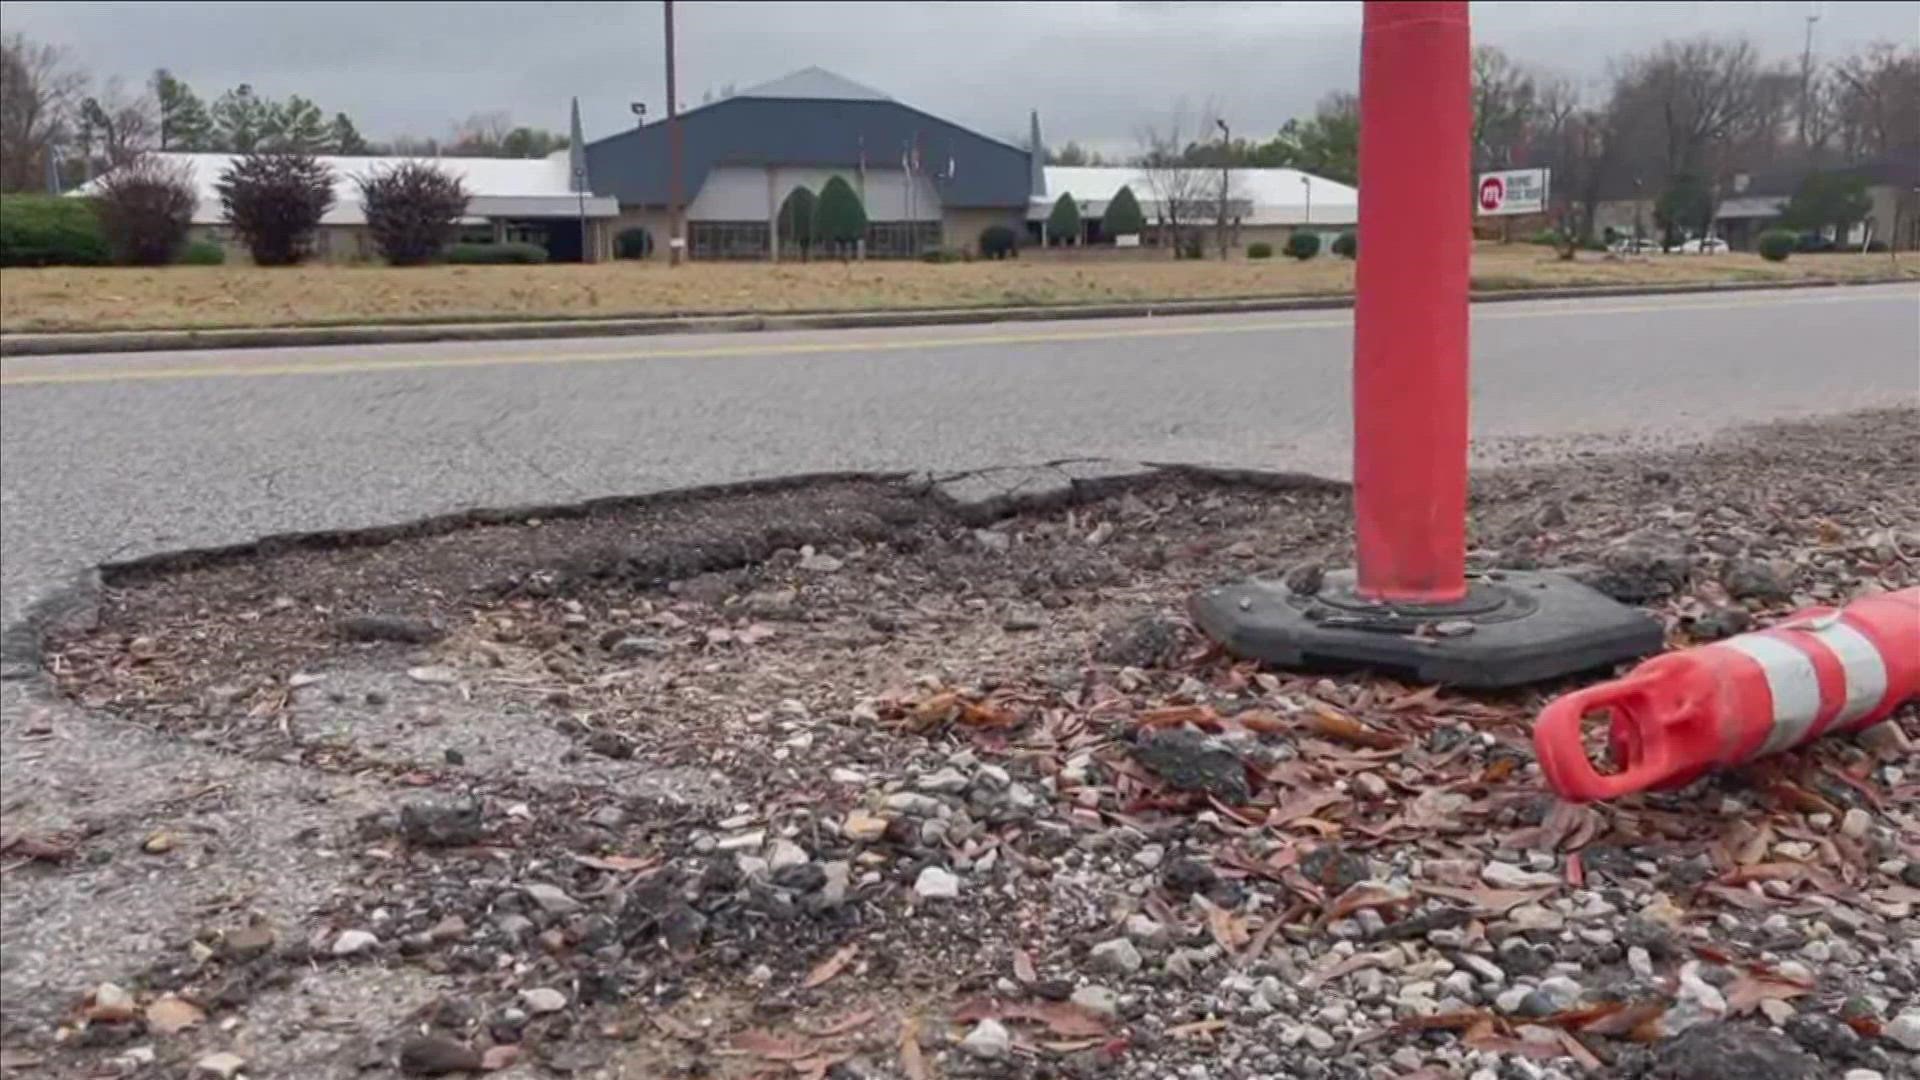 State roads are maintained by the Tennessee Department of Transportation. Drivers can text "833-TDOTFIX" to report potholes, but there's also an app drivers can use.